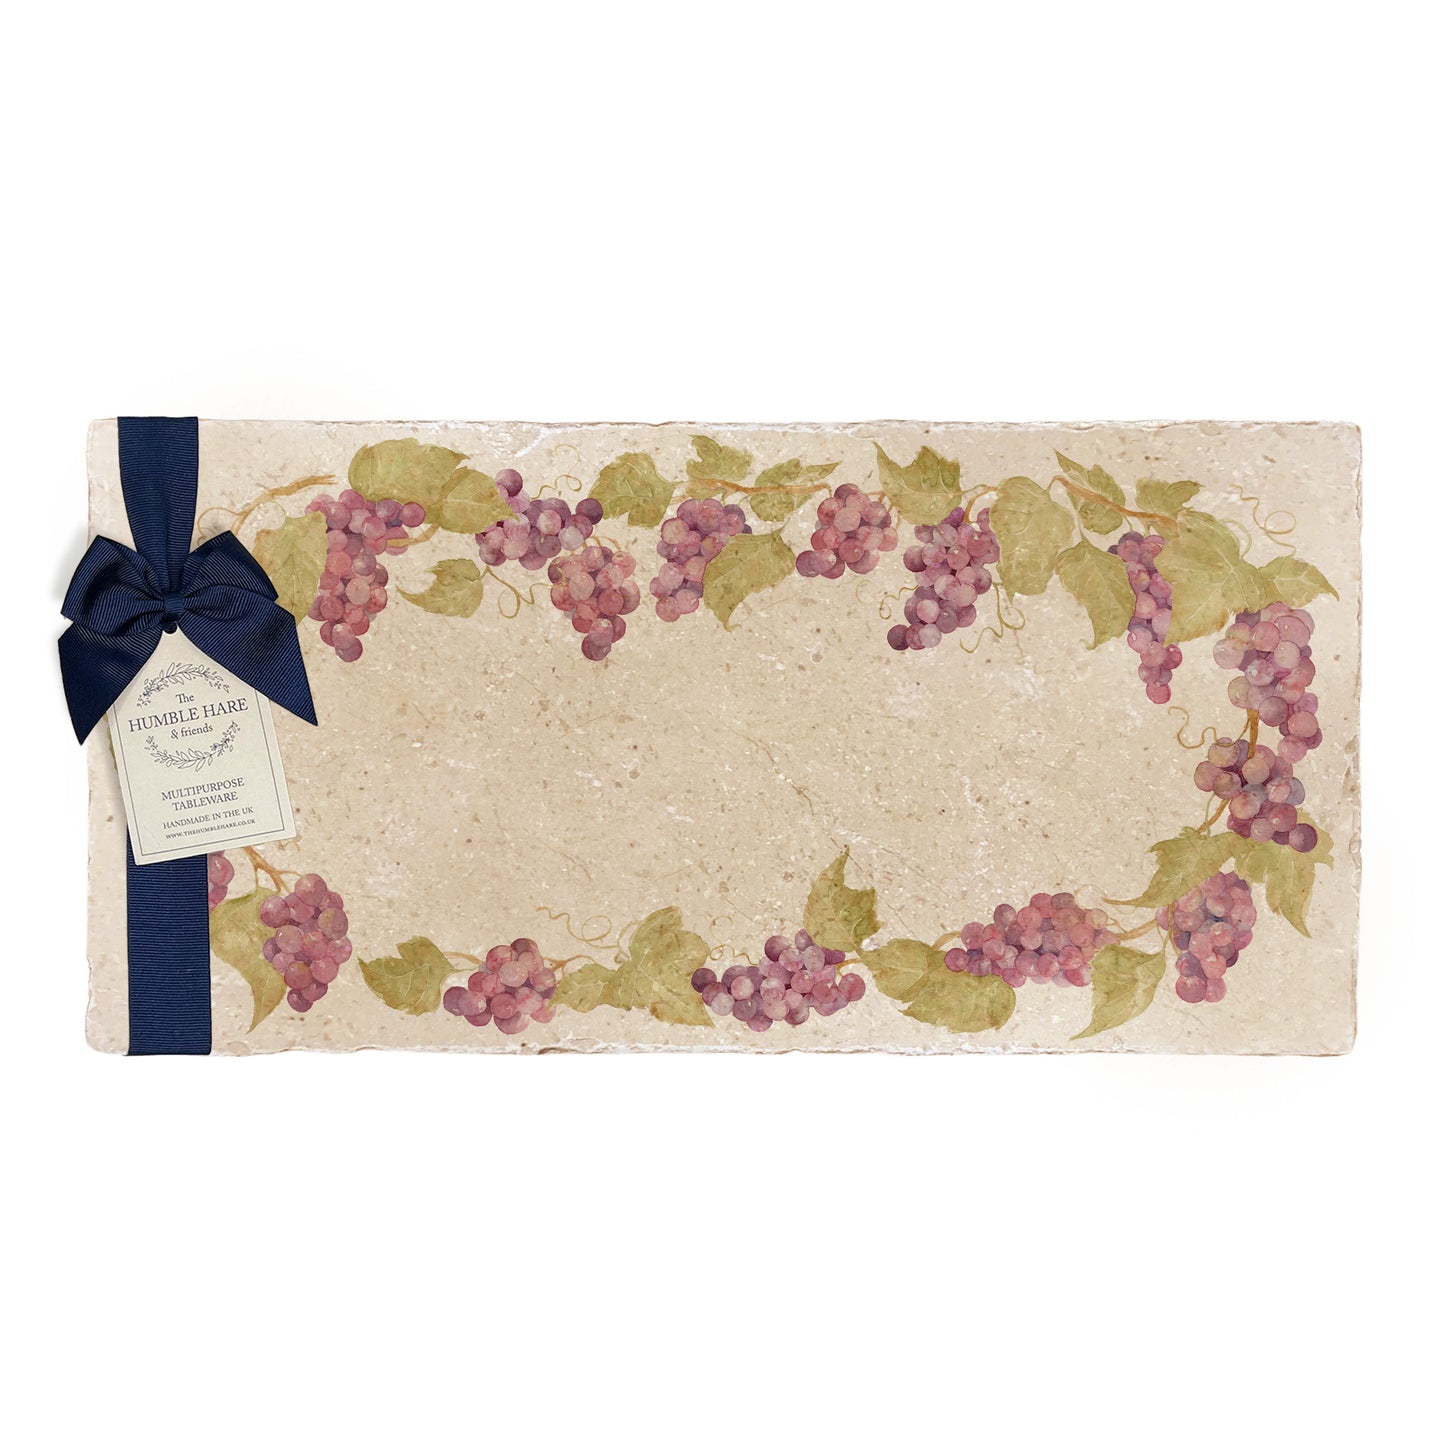 A multipurpose marble sharing platter with a watercolour grape vine wreath design, packaged with a luxurious dark blue bow and branded gift tag.